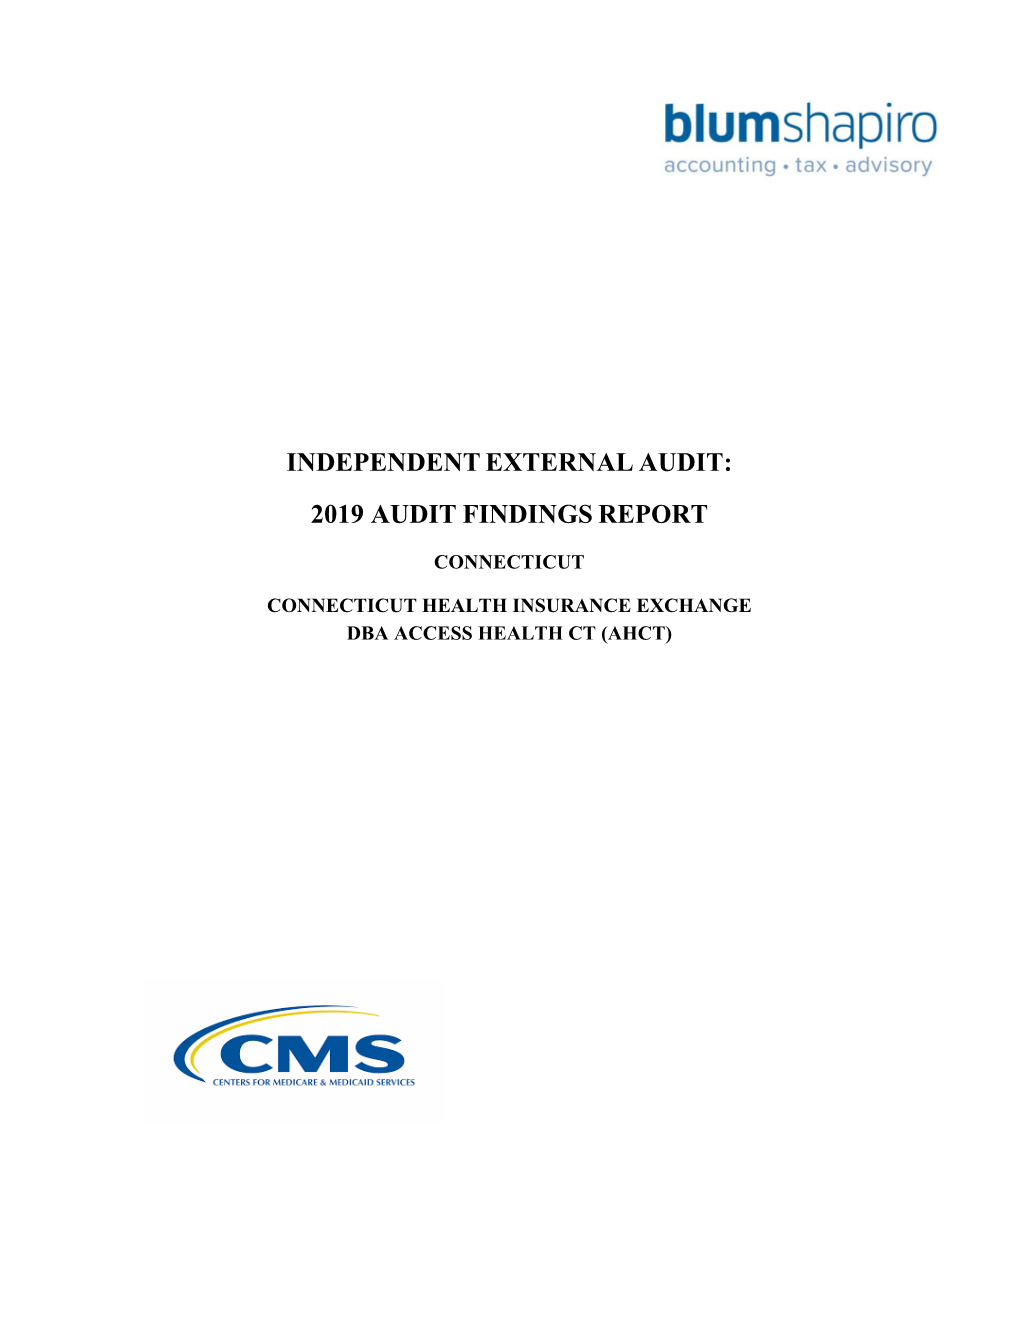 Report for CMS Programmatic Audit 2019